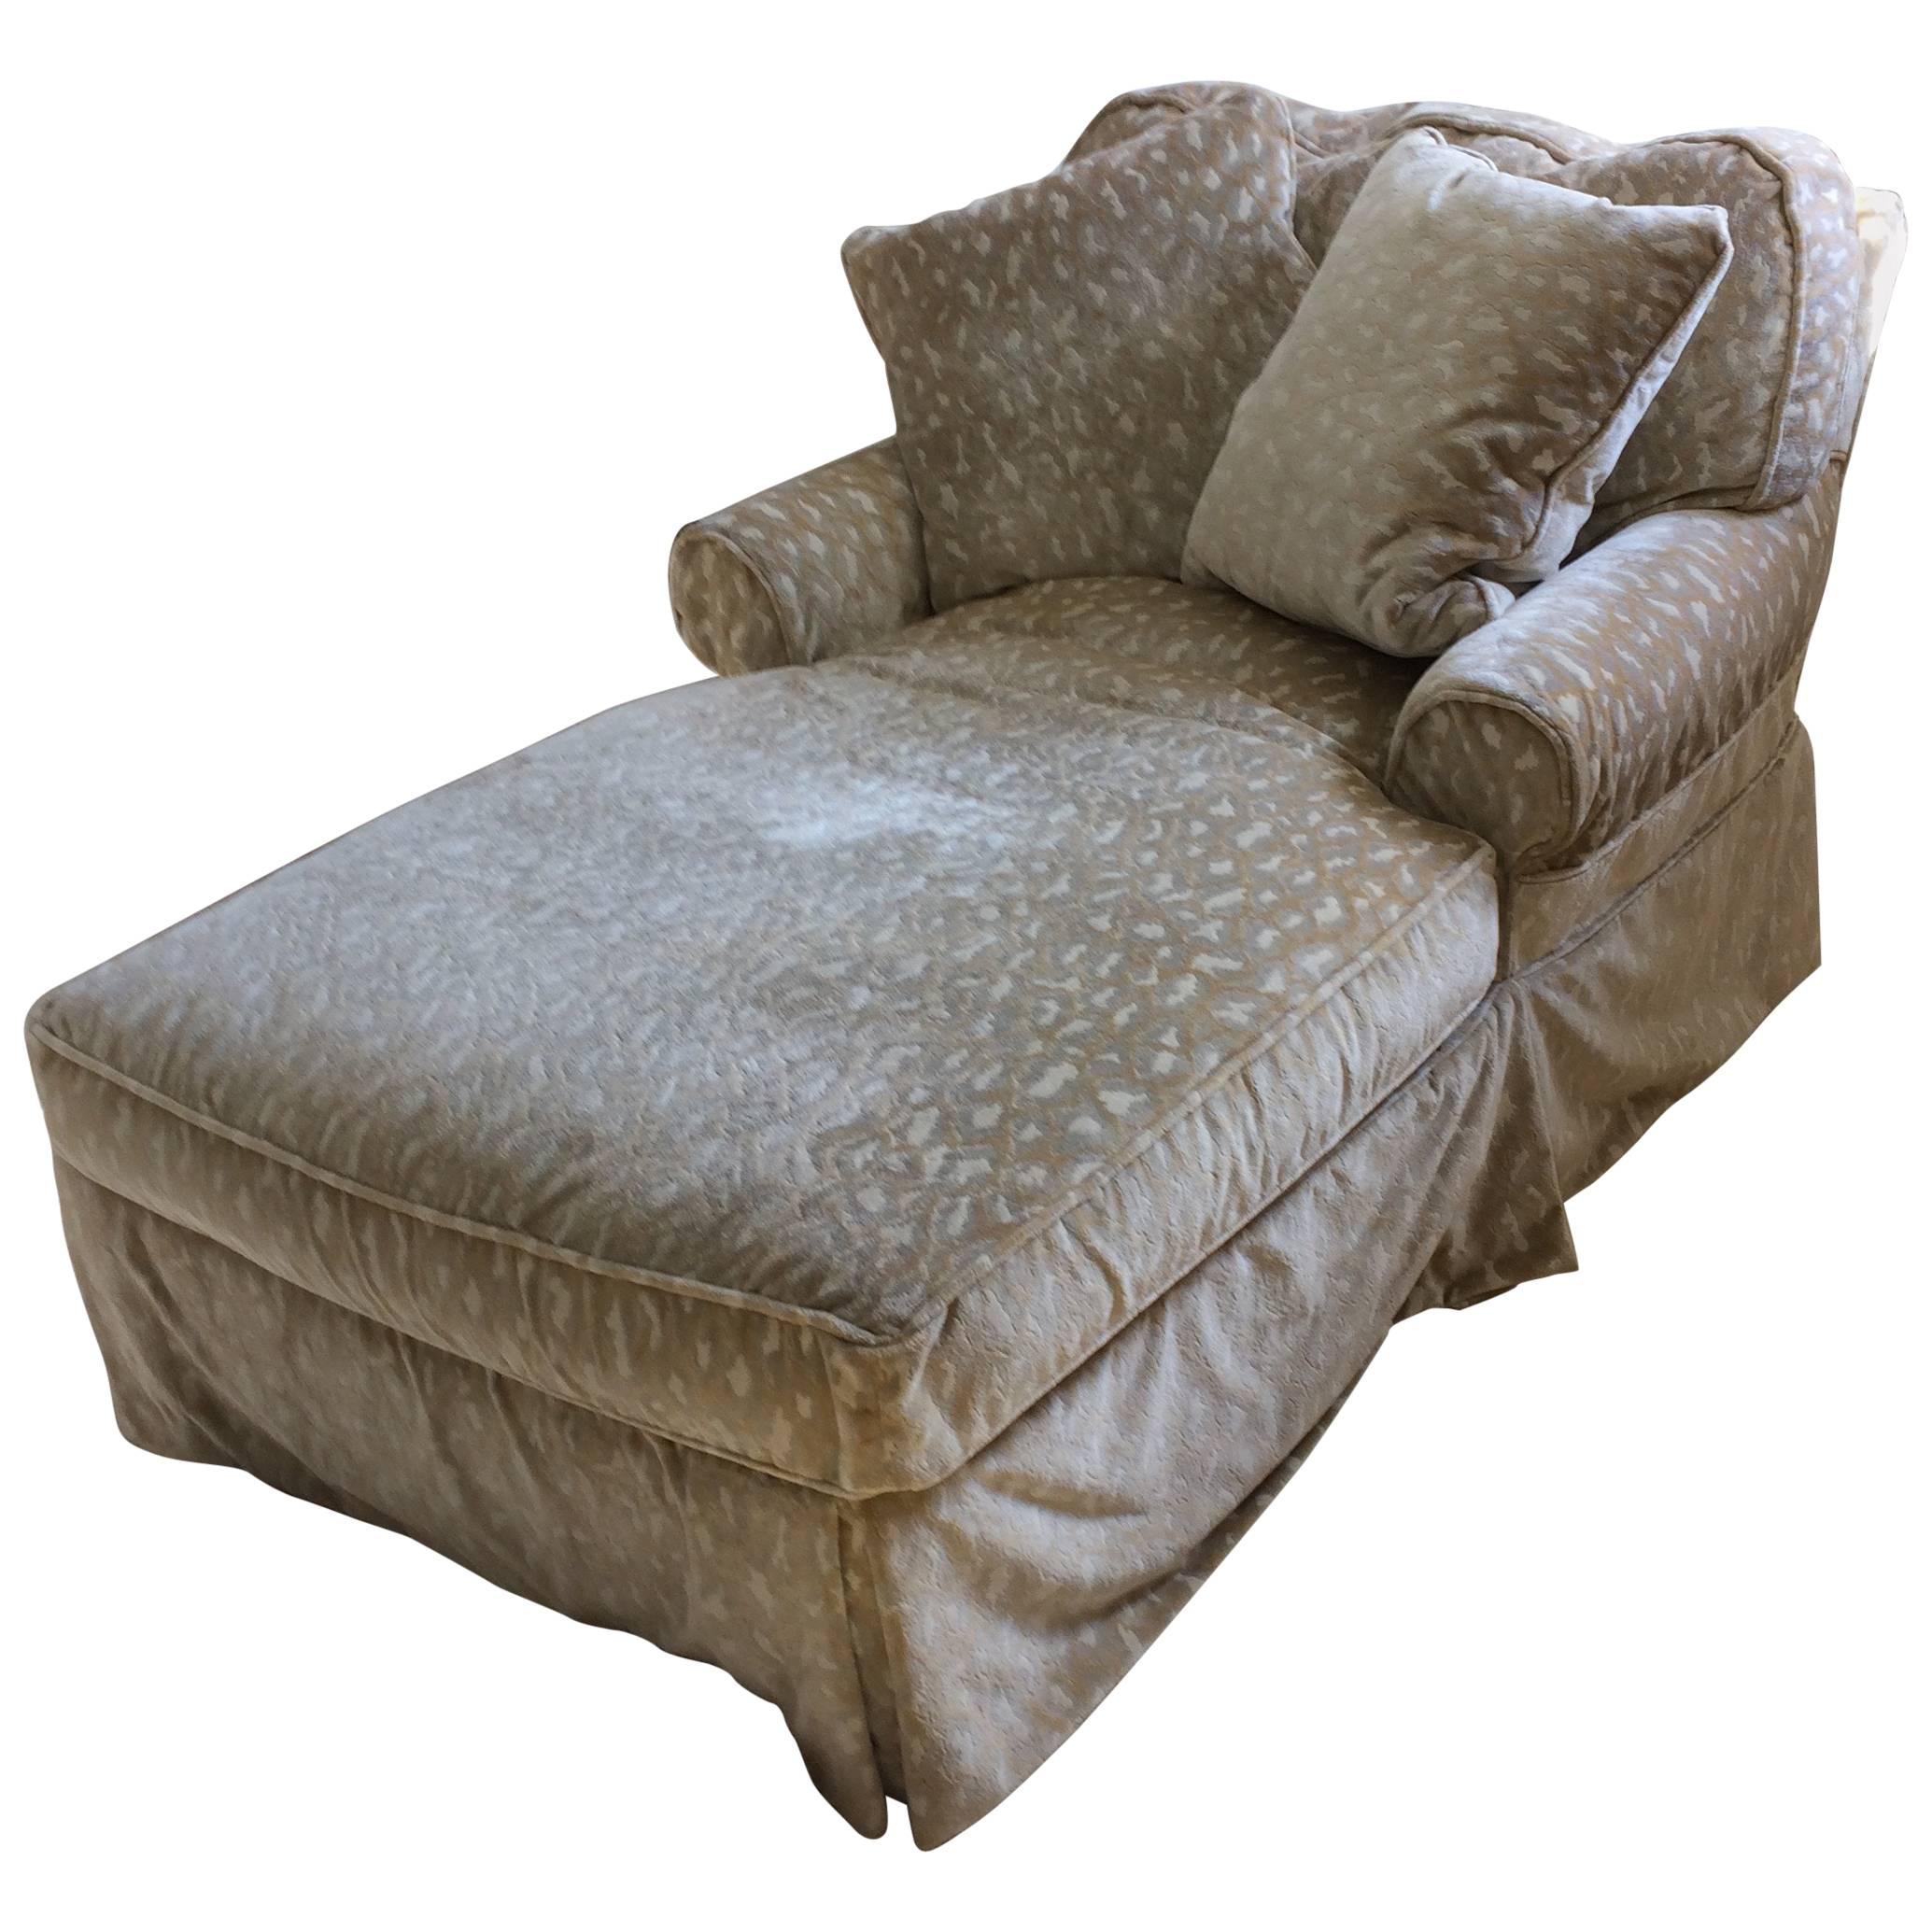 Dreamy Down Filled Chaise Longue